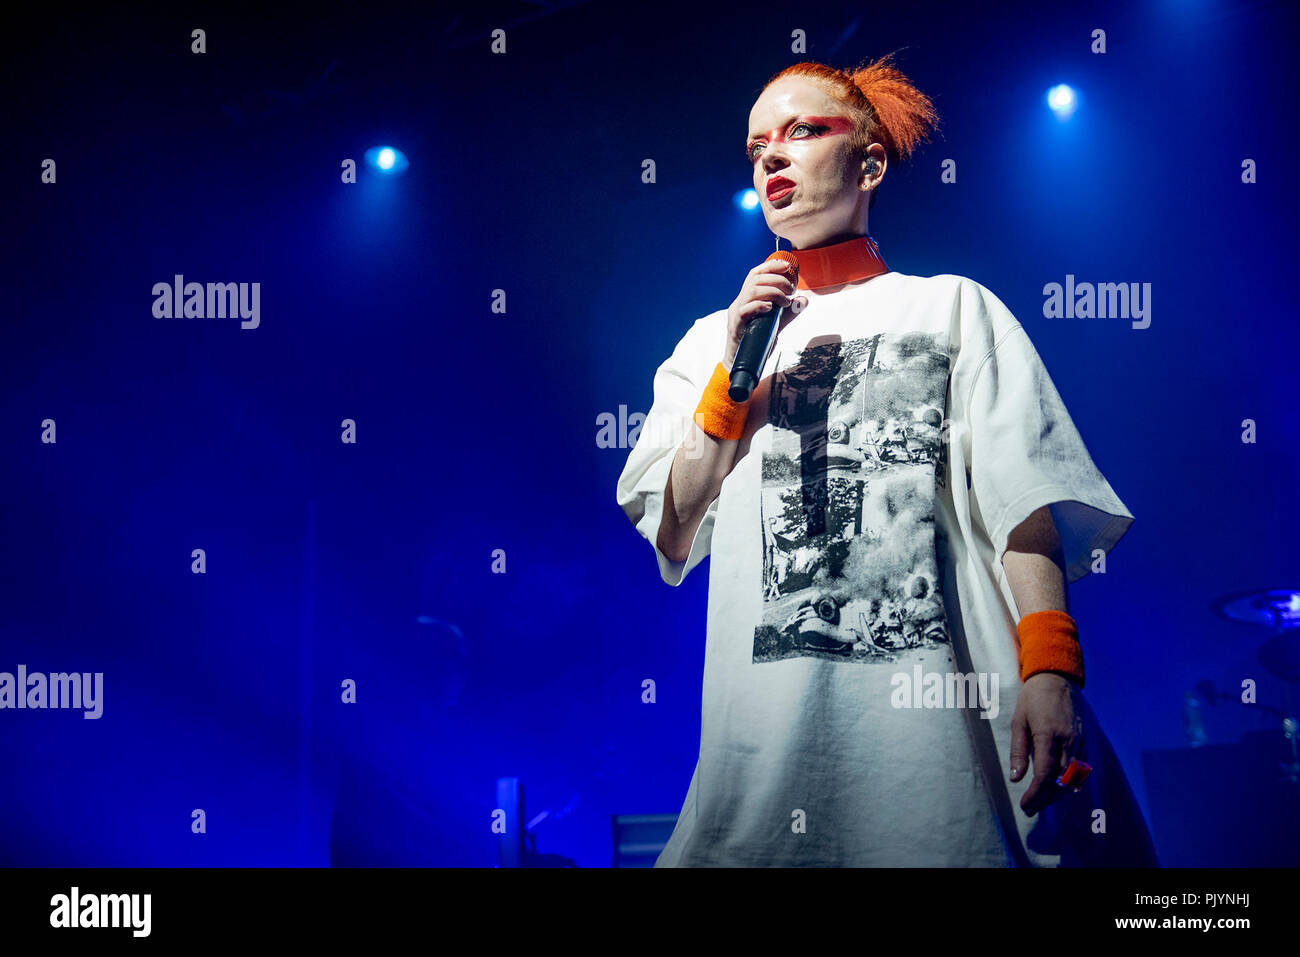 Manchester, UK. 9th September 2018.Shirley Manson, Duke Erikson, Steve Marker and Butch Vig of the band Garbage perform at the Manchester Academy,  Manchester 09/09/2018 Credit: Gary Mather/Alamy Live News Stock Photo